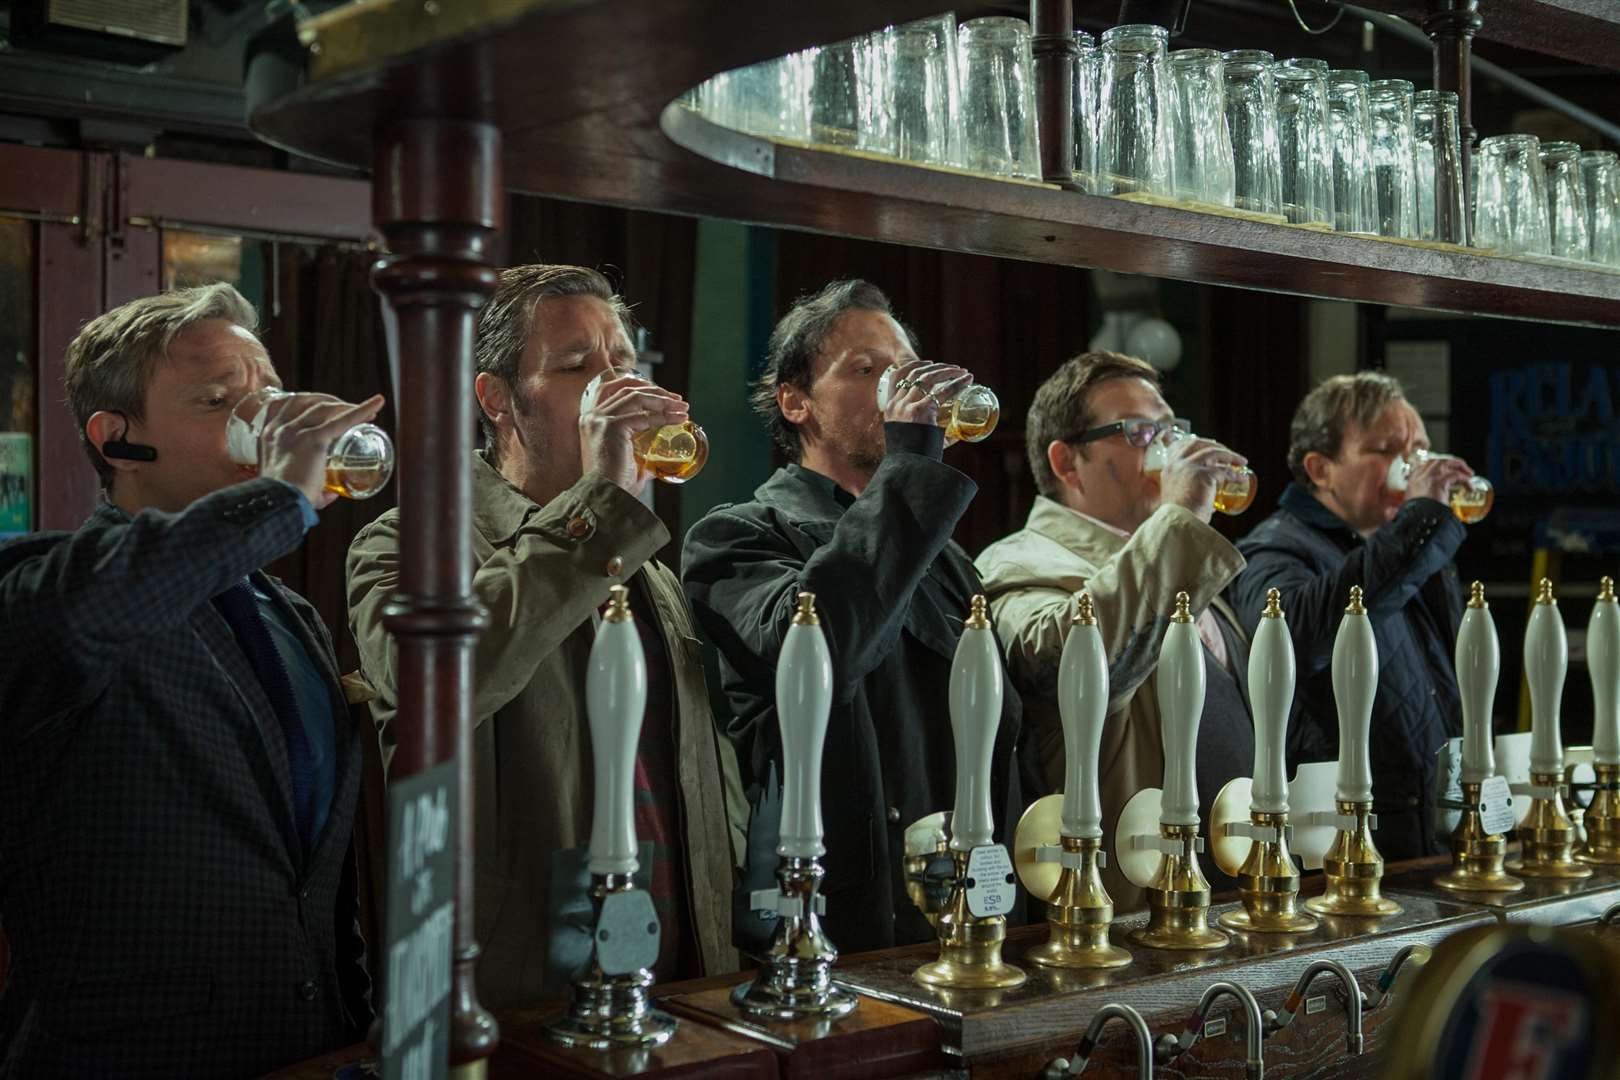 Martin Freeman as Oliver, Paddy Considine as Steven, Simon Pegg as Gary King, Nick Frost as Andrew Knightley and Eddie Marsan as Peter, in The World's End. Picture: PA Photo/UPI Media.